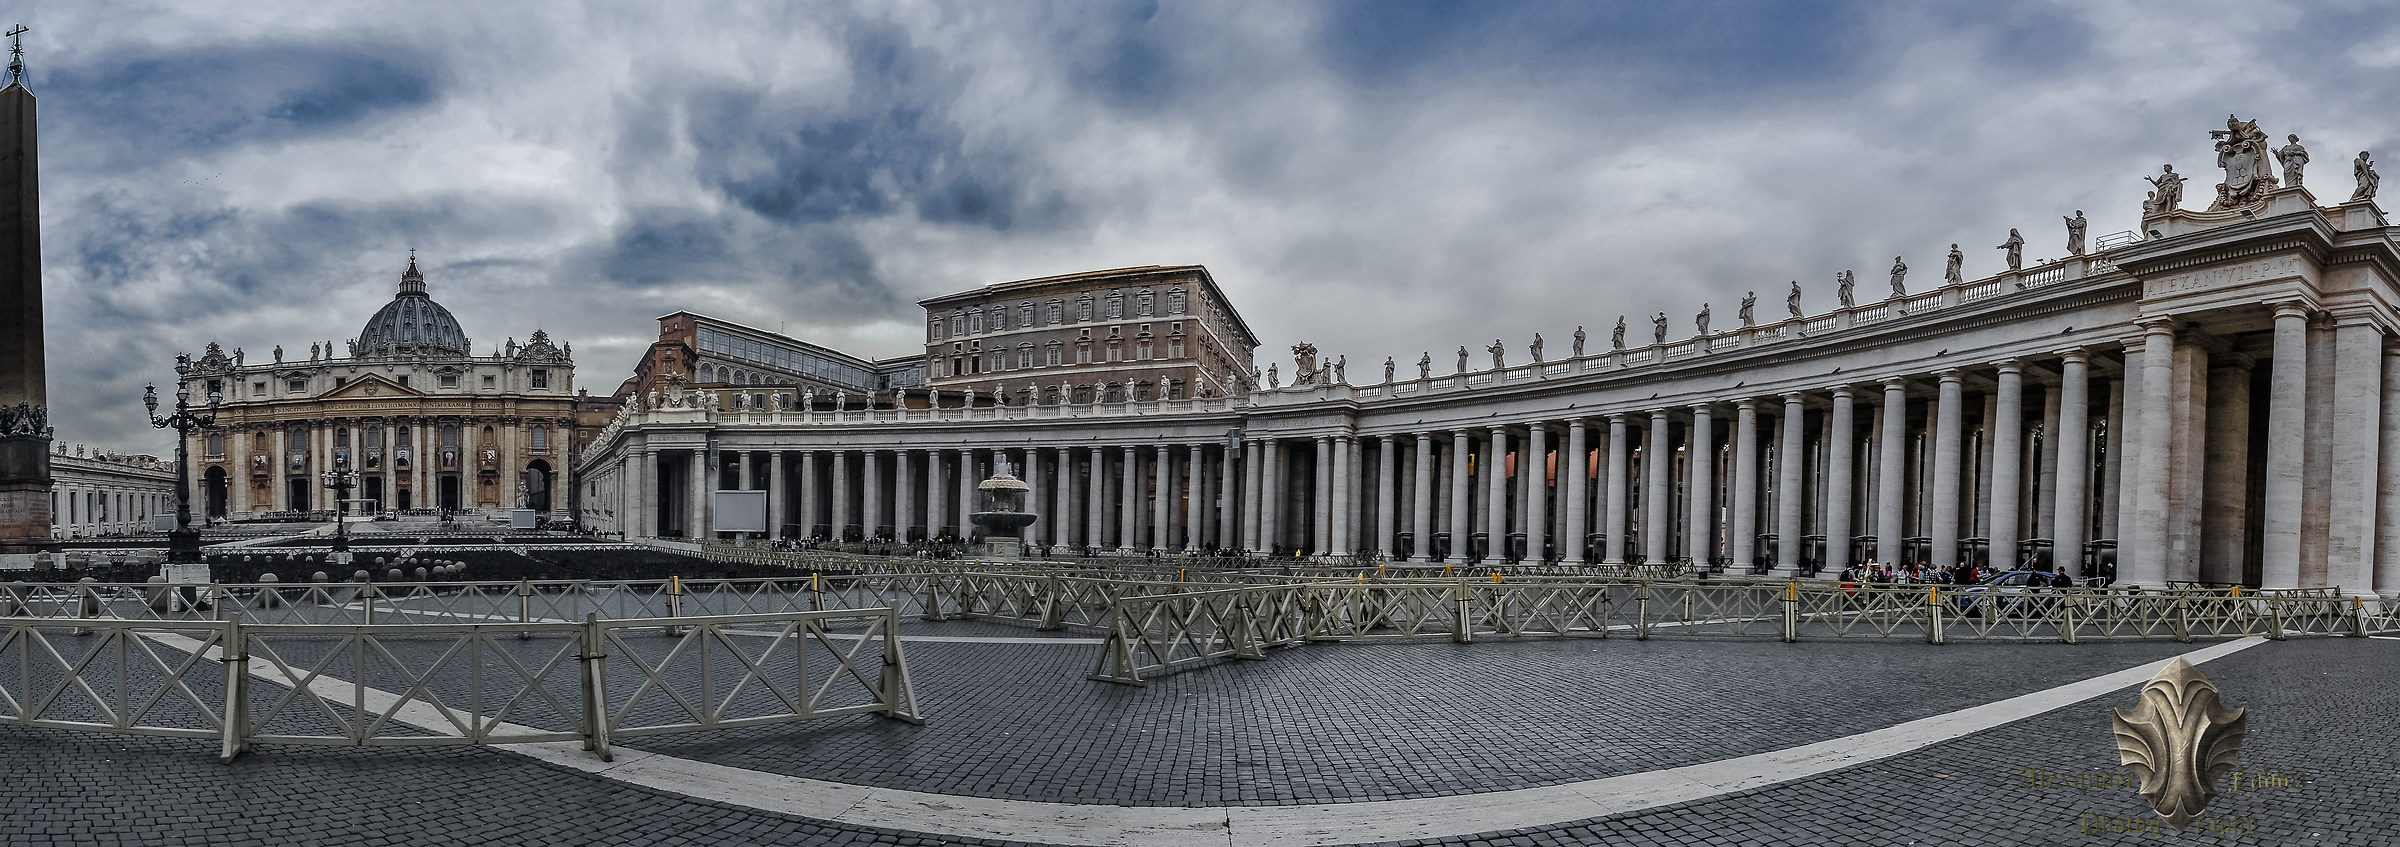 St. Peter in 5 shots with Samyang lens 14mm...